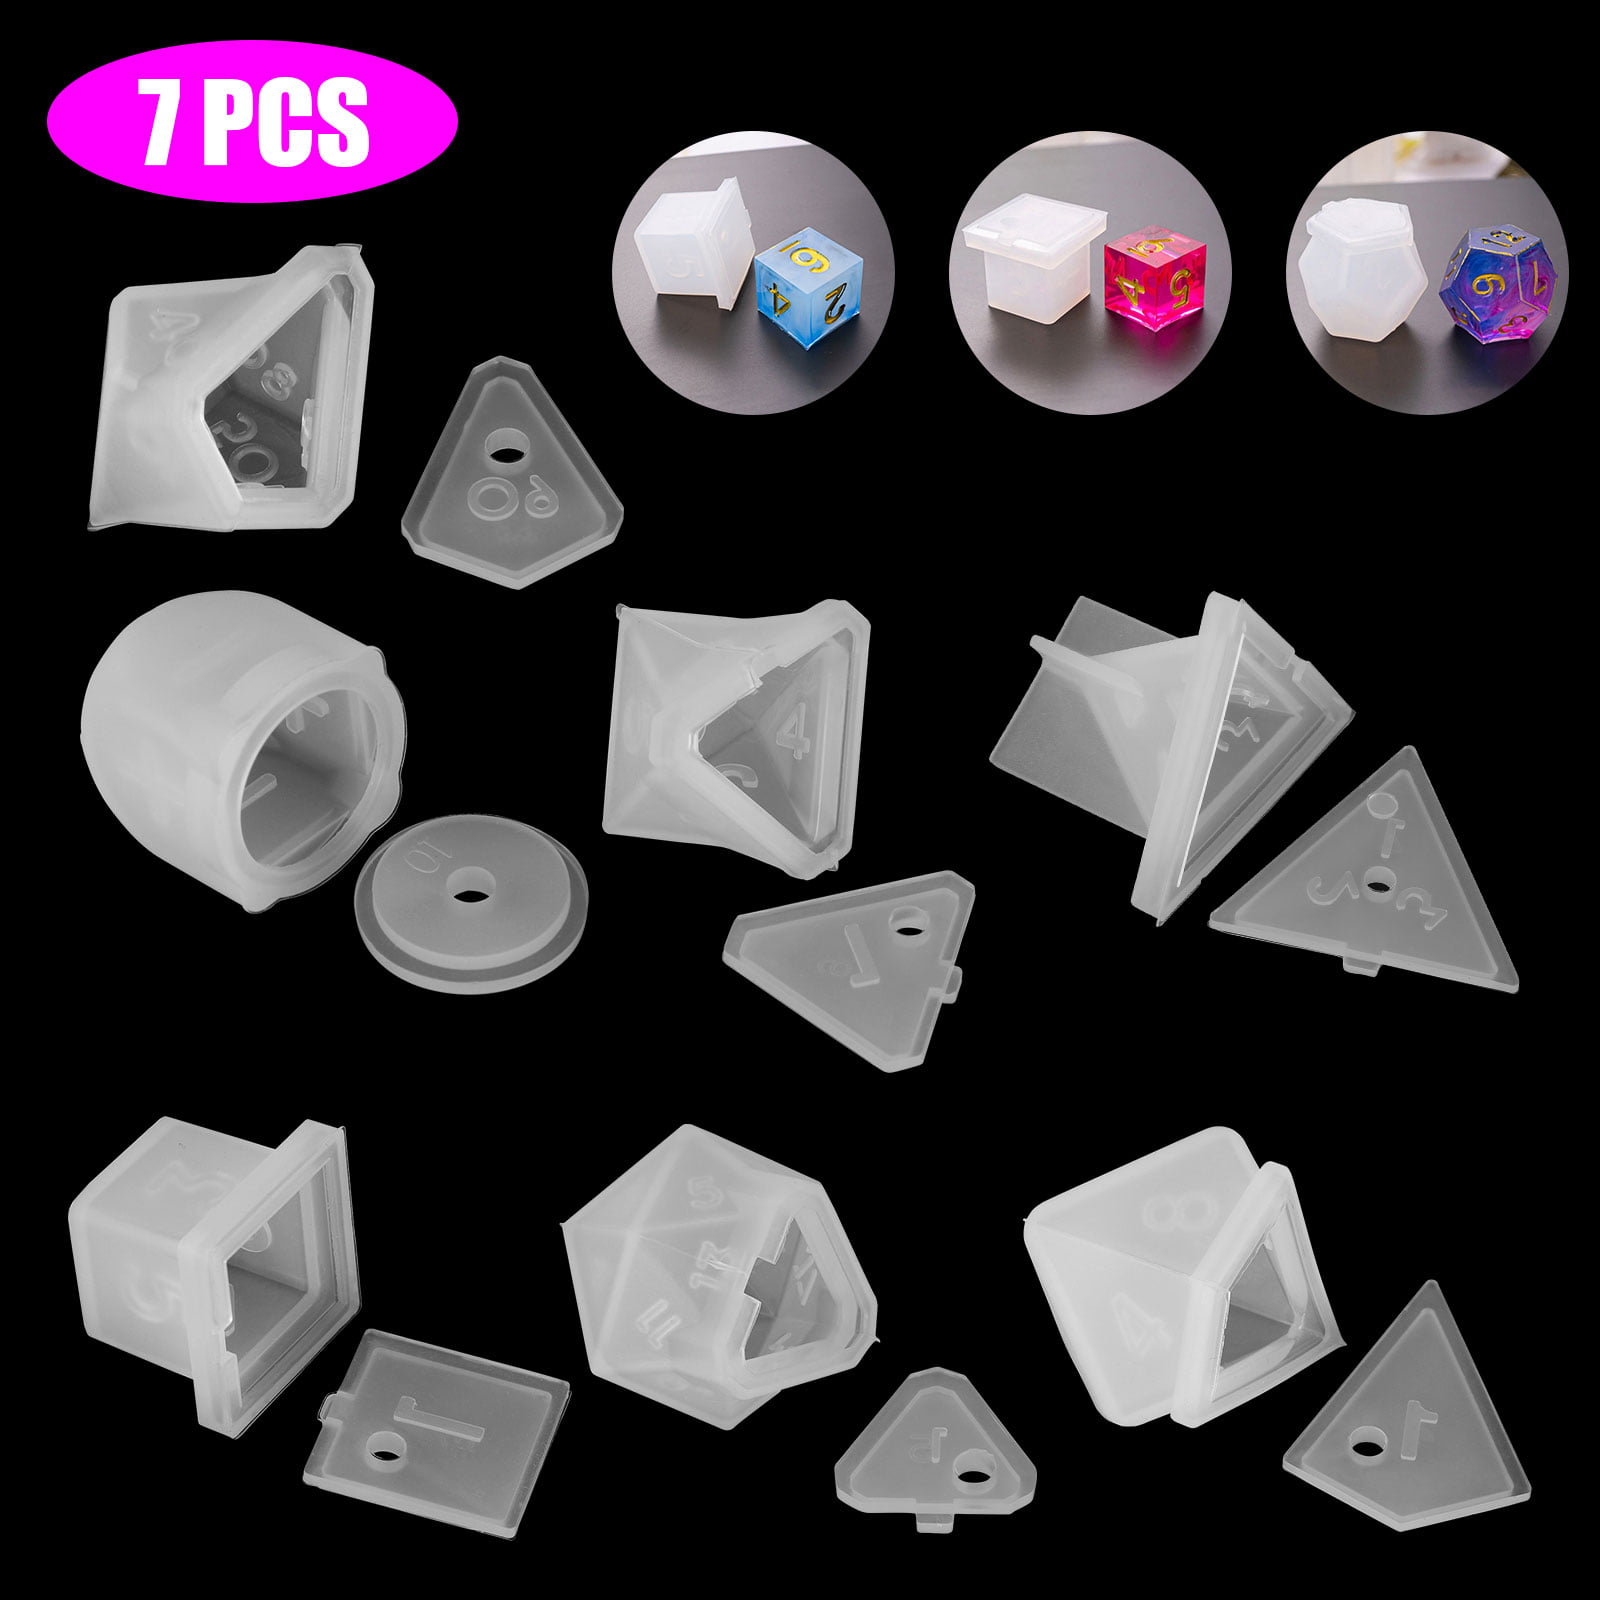 XF Silicone Dice Pendant Jewelry Making Mold Resin Epoxy Mould Casting Craft